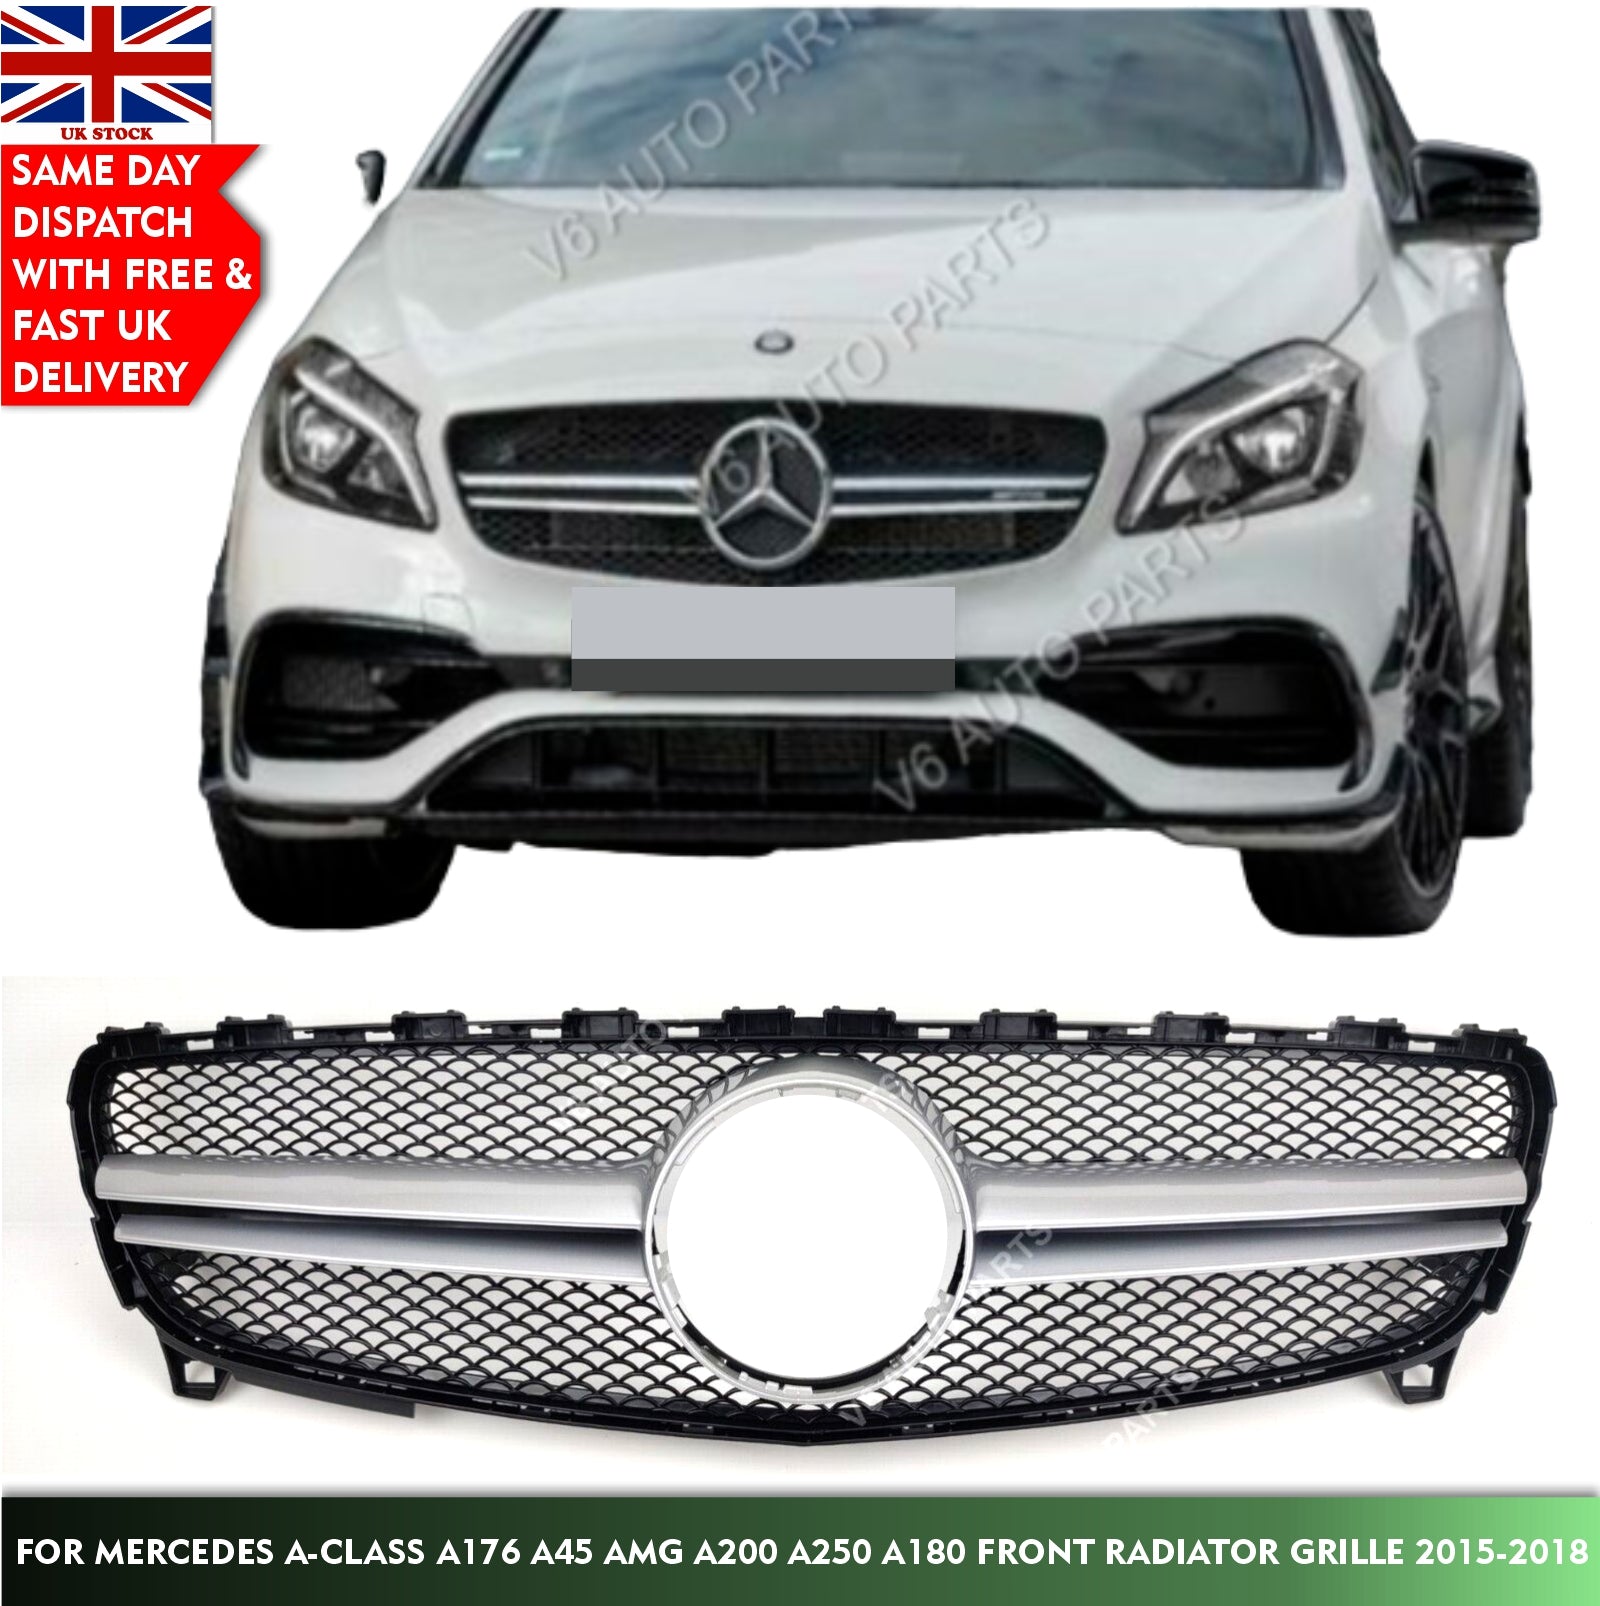 For Mercedes A-Class A176 A220 A250 Grill A45 AMG Front Radiator Grille 2015-18